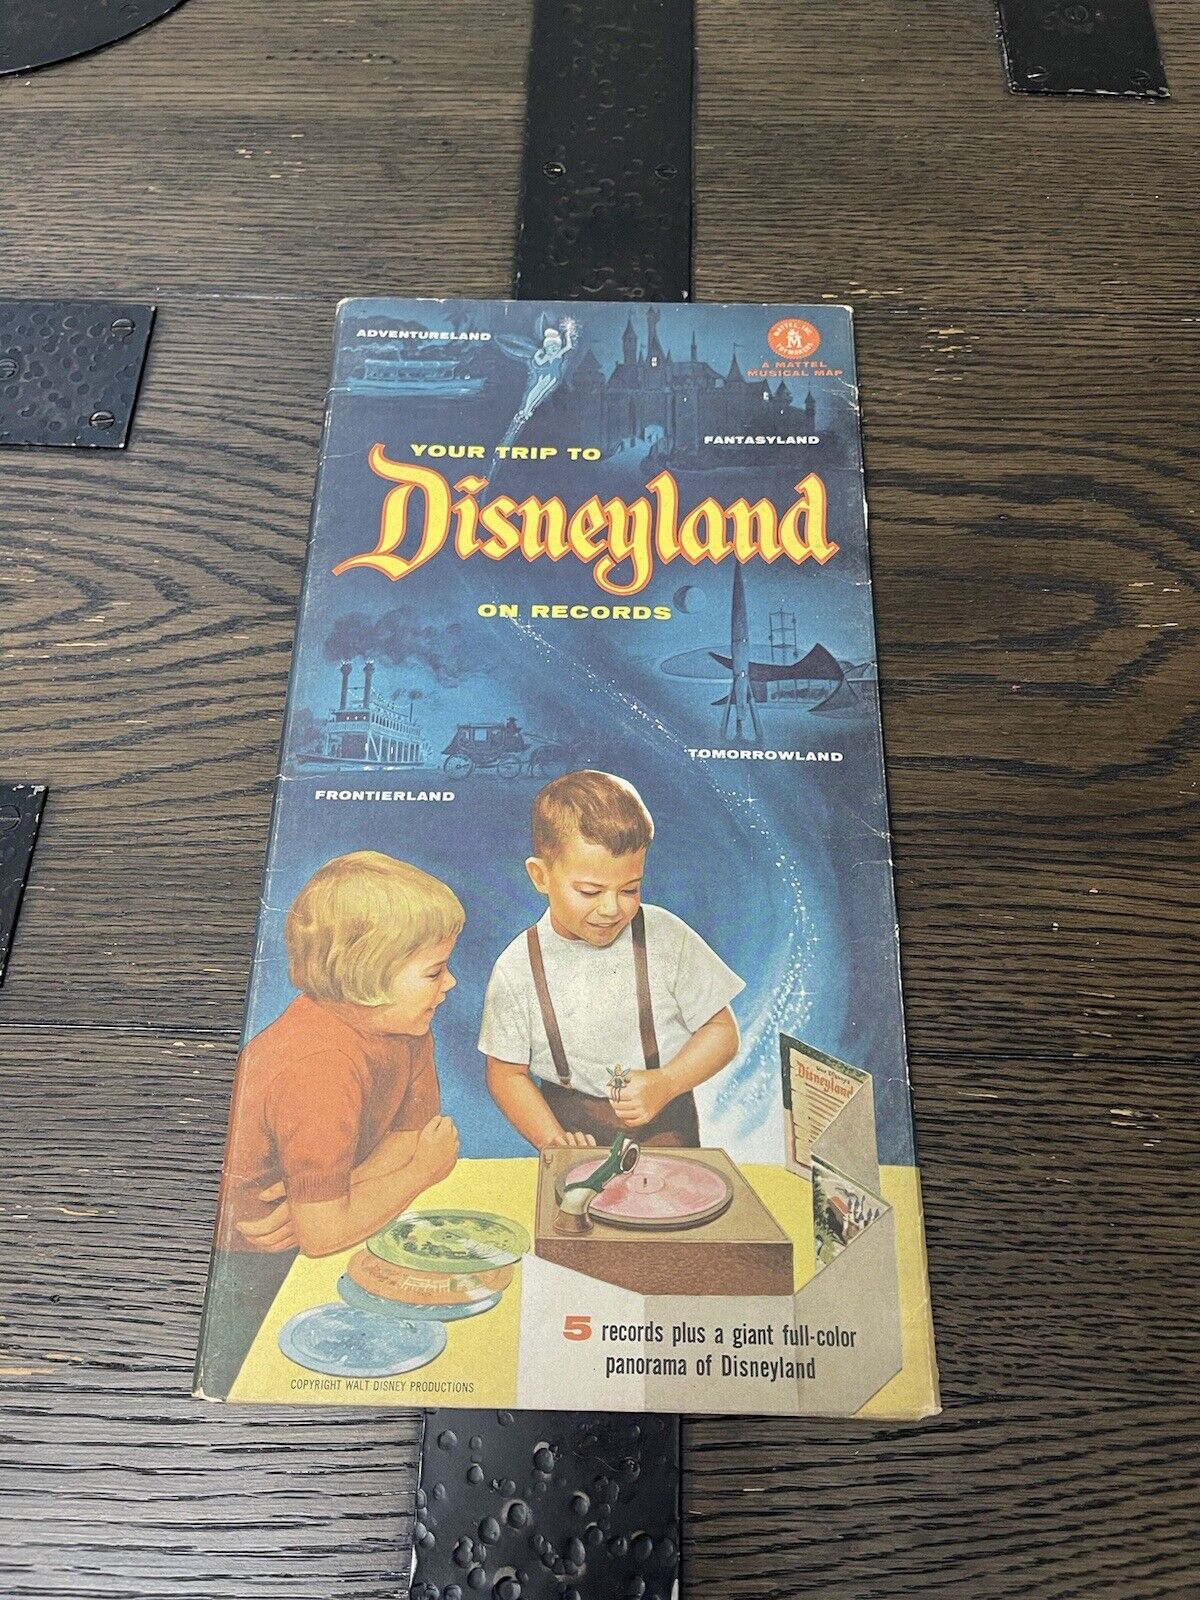 1955 NOS NEW OLD STOCK MATTEL DISNEYLAND MUSICAL MAP WITH 5 RECORDS + CUT-OUTS